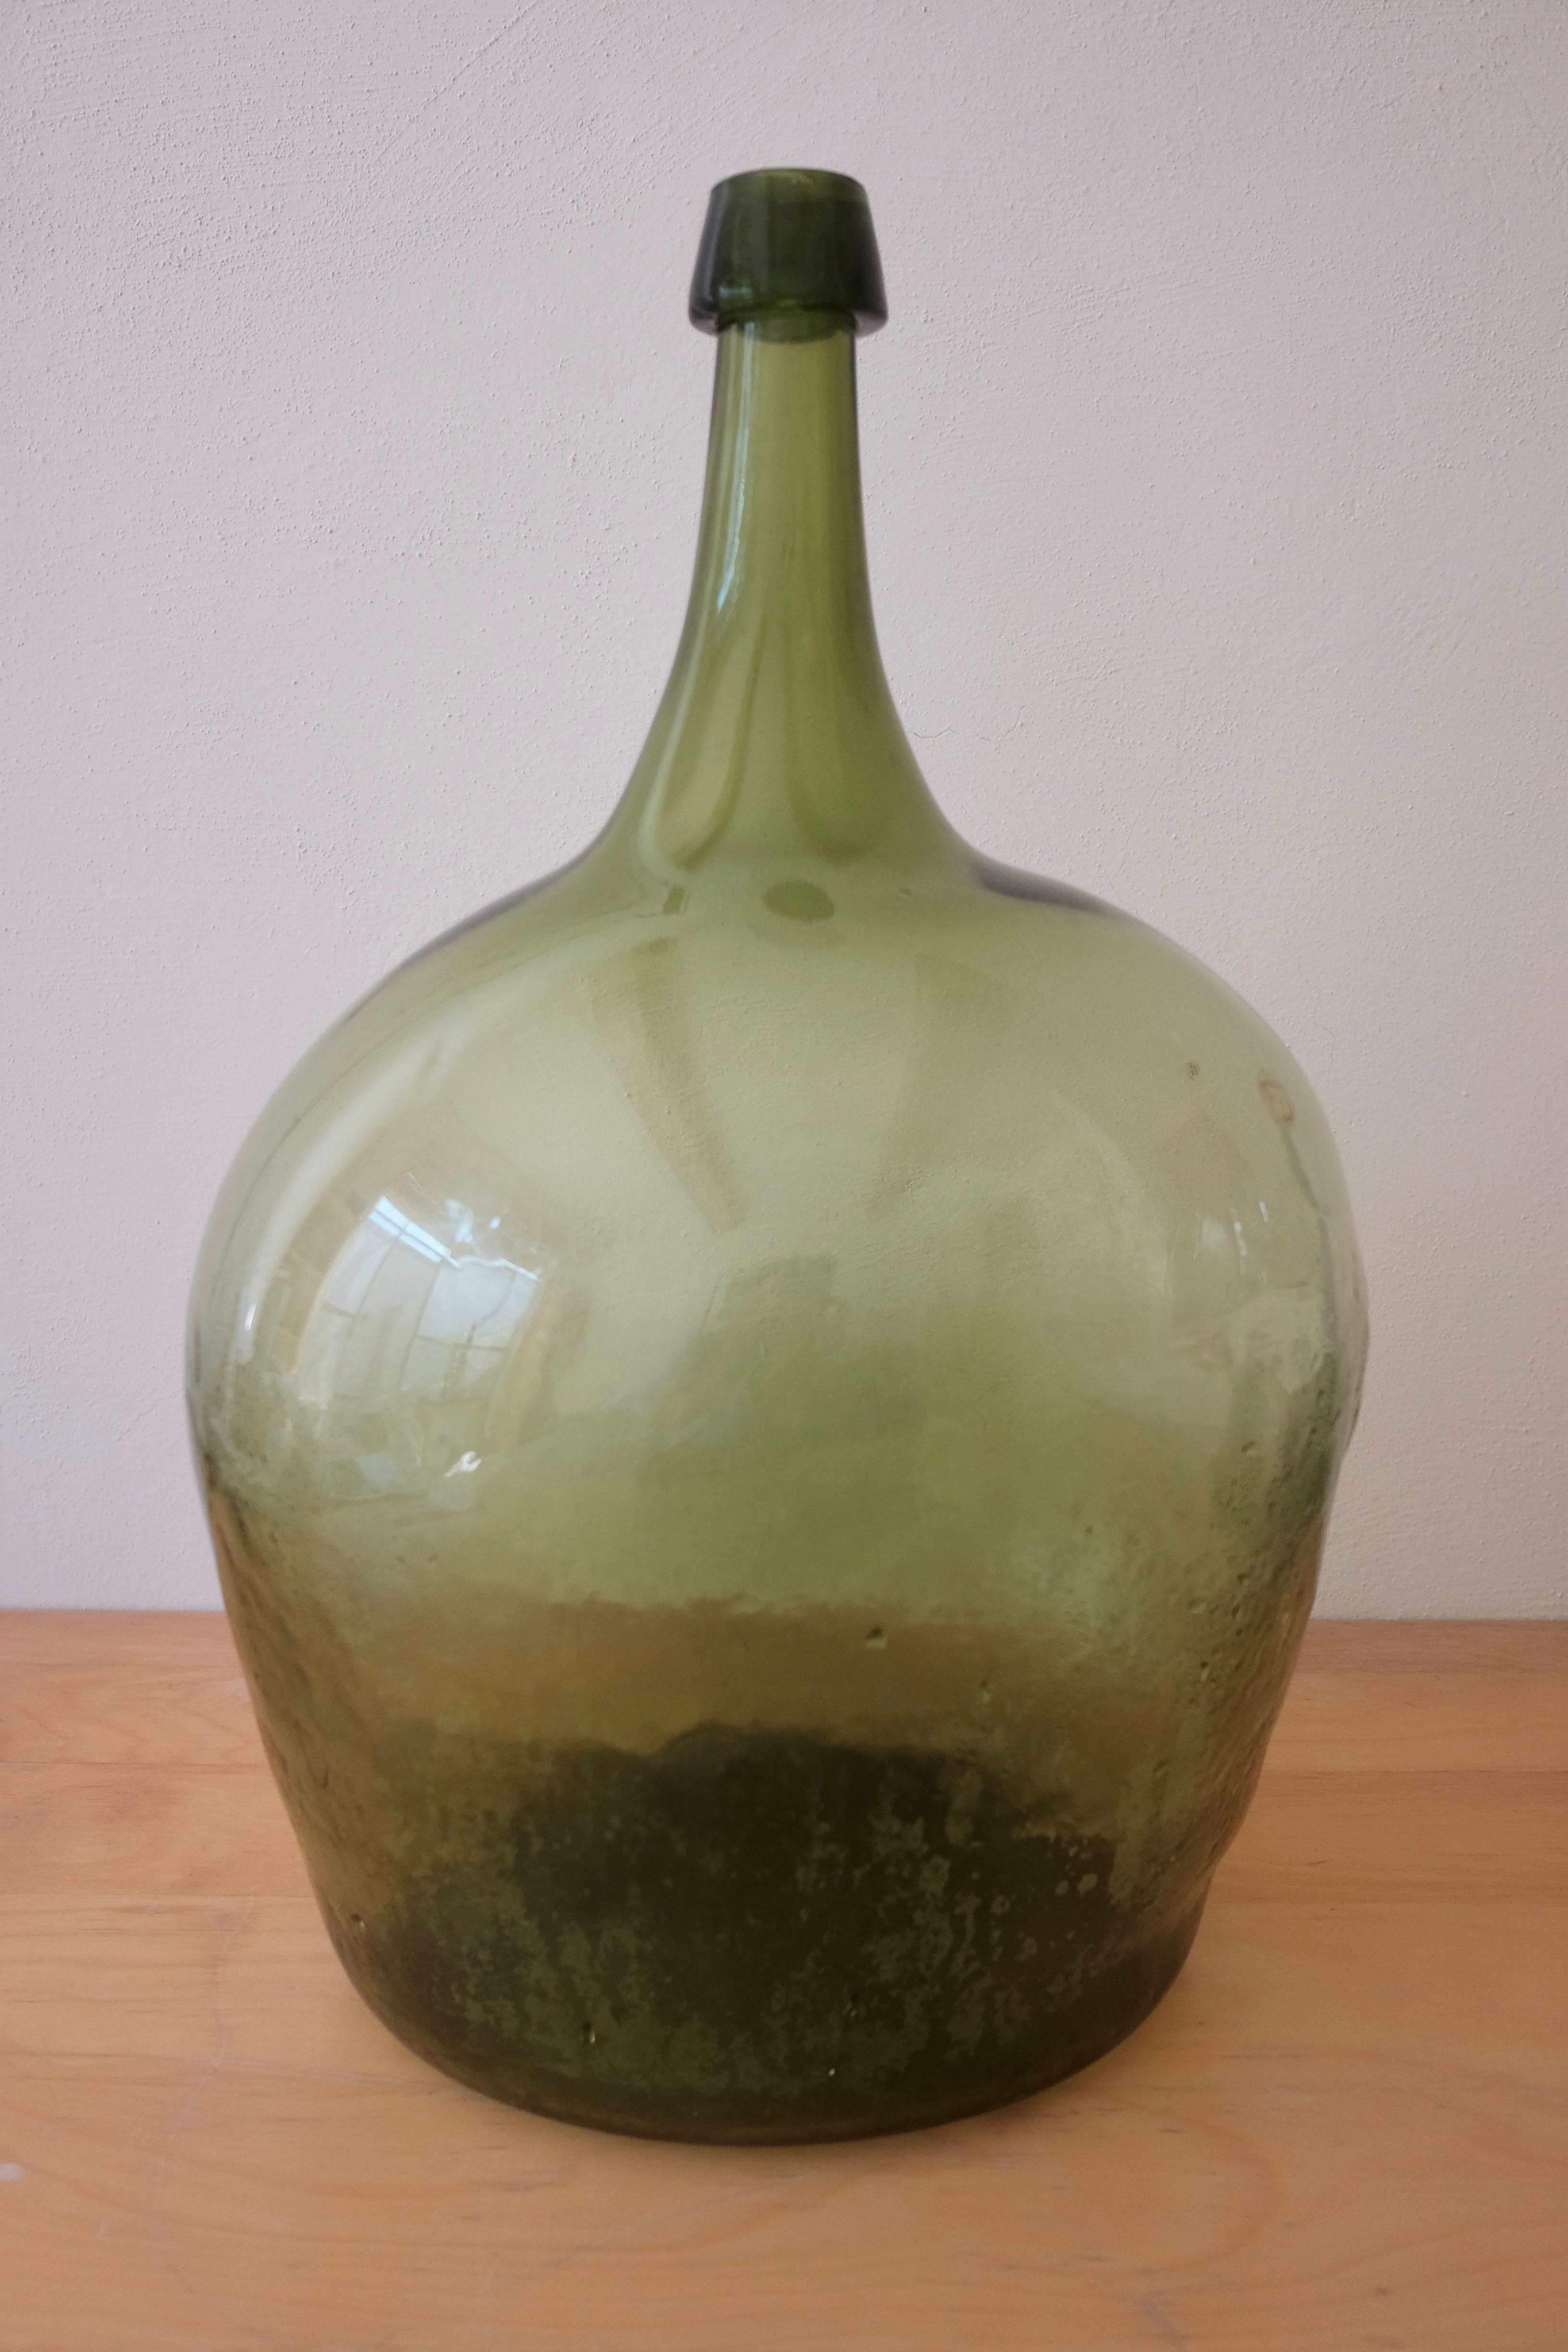 Rustic Hand Blown Mezcal Bottle from Mexico